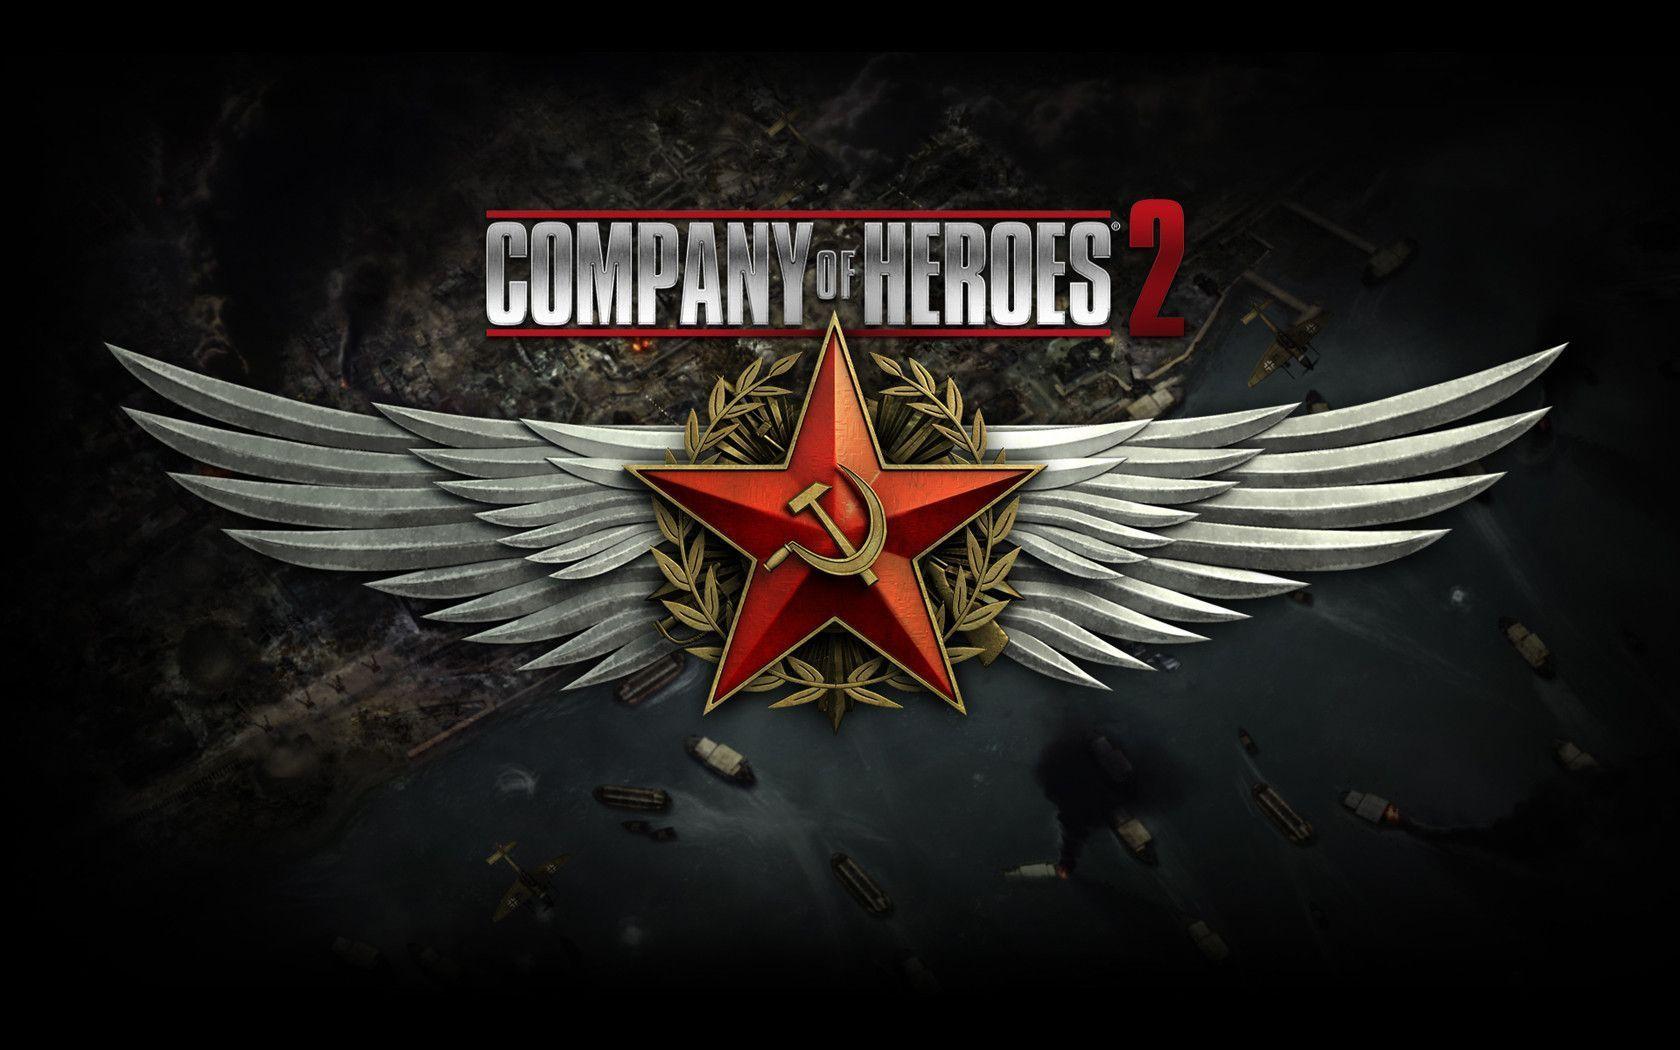 Company of Heroes 2 Video Game Wallpaper